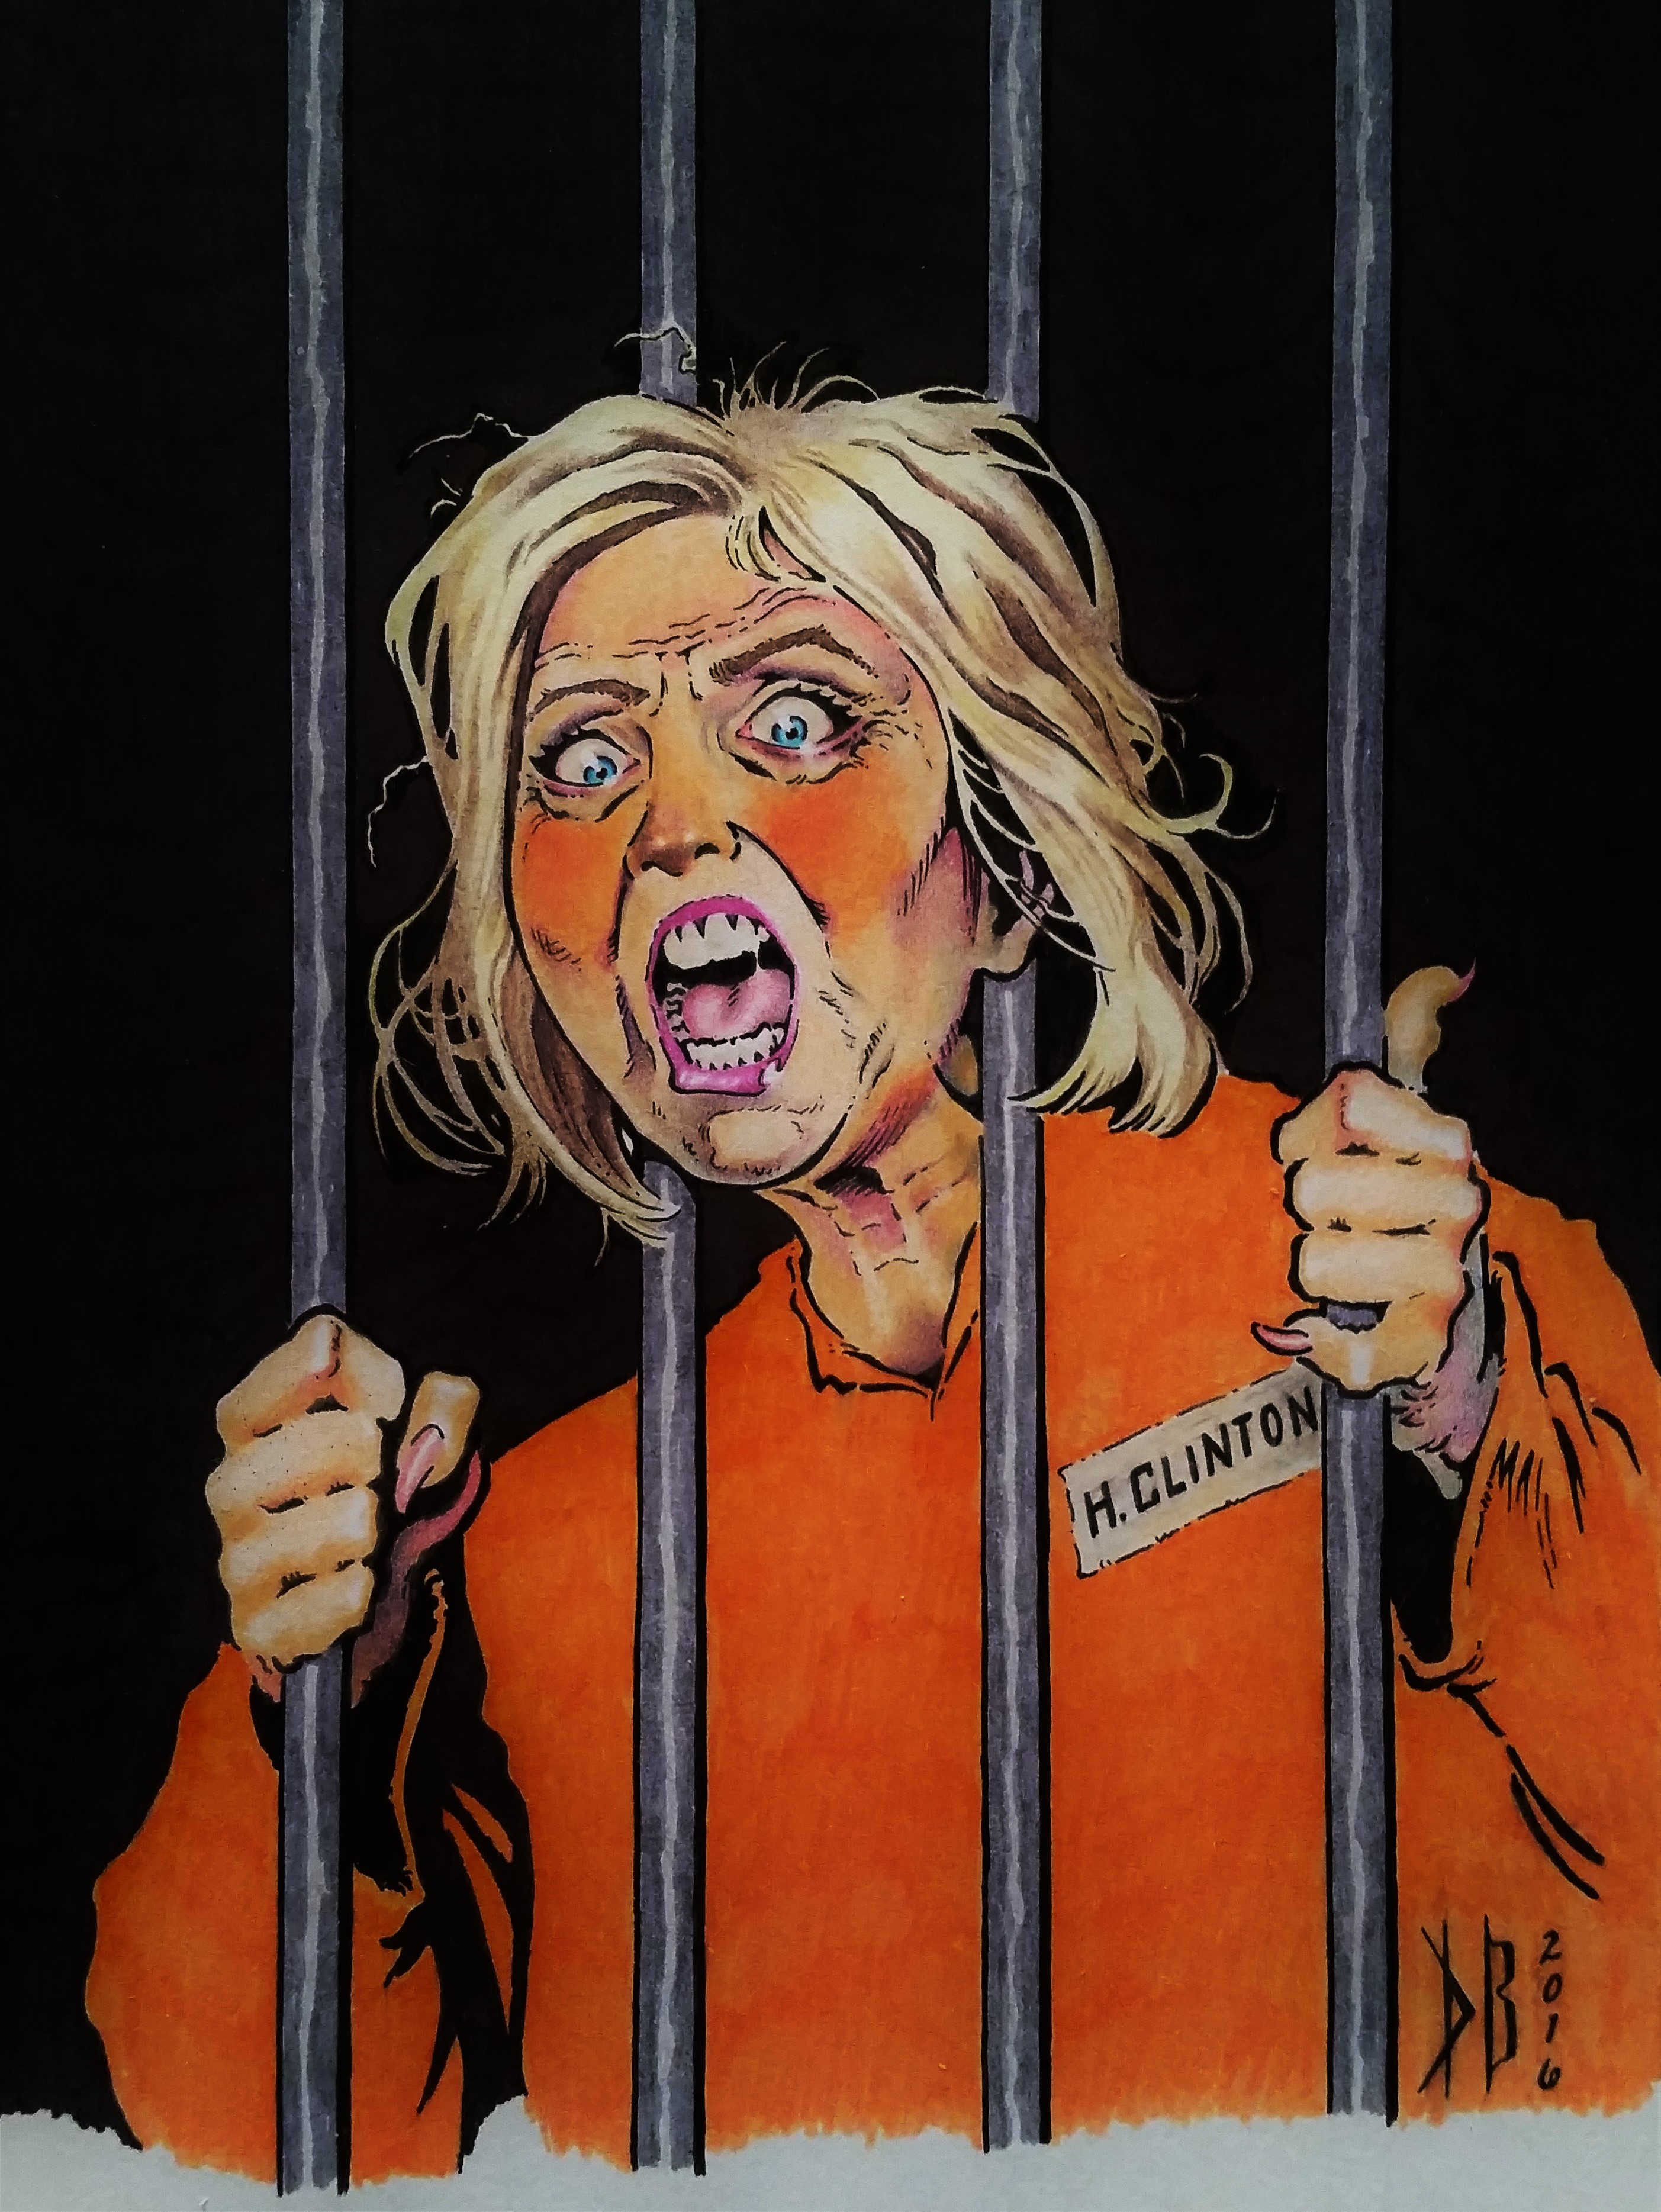 Hillary-Clinton-Saul-Alinsky-radical-Luciferian-Benghazi-murders-Bill-Clinton-affairs-rapes-necromancy-mentally-ill-indictment-emails-lies-amnesty-refugees-illegals-immigrants